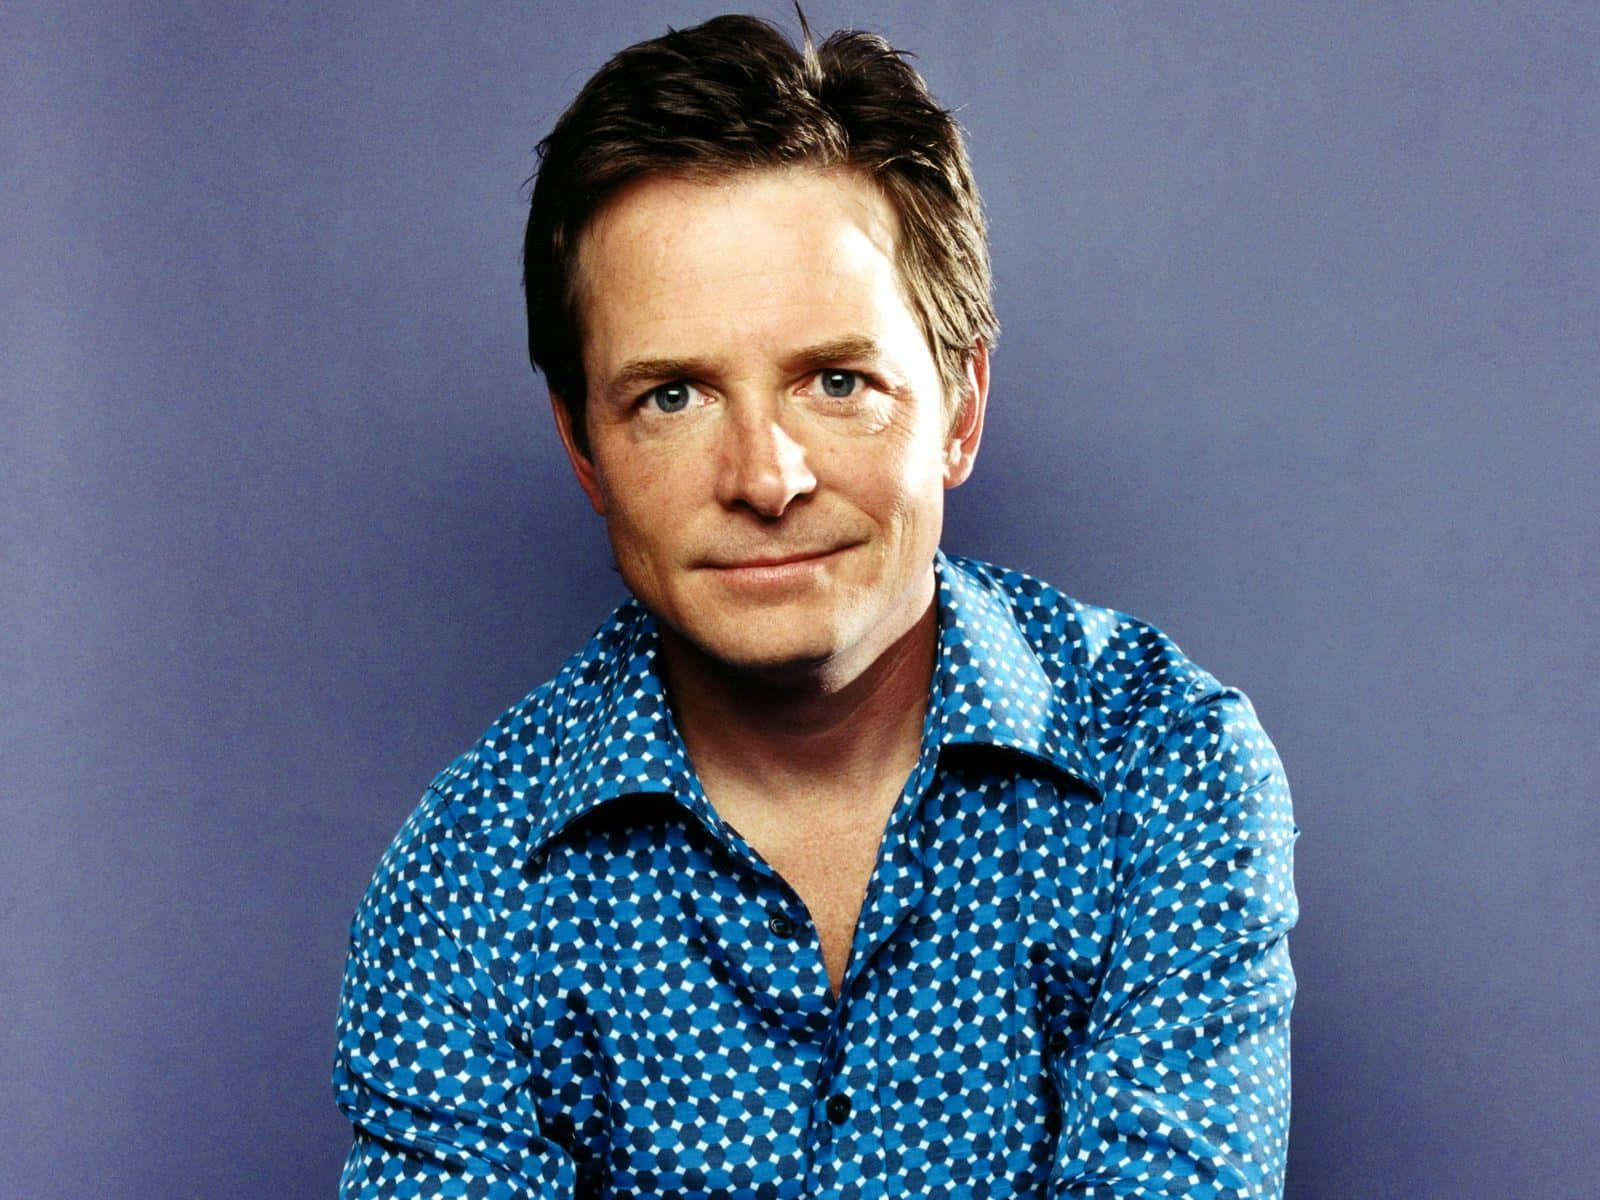 Michael J Fox In His Iconic Role As Marty Mcfly